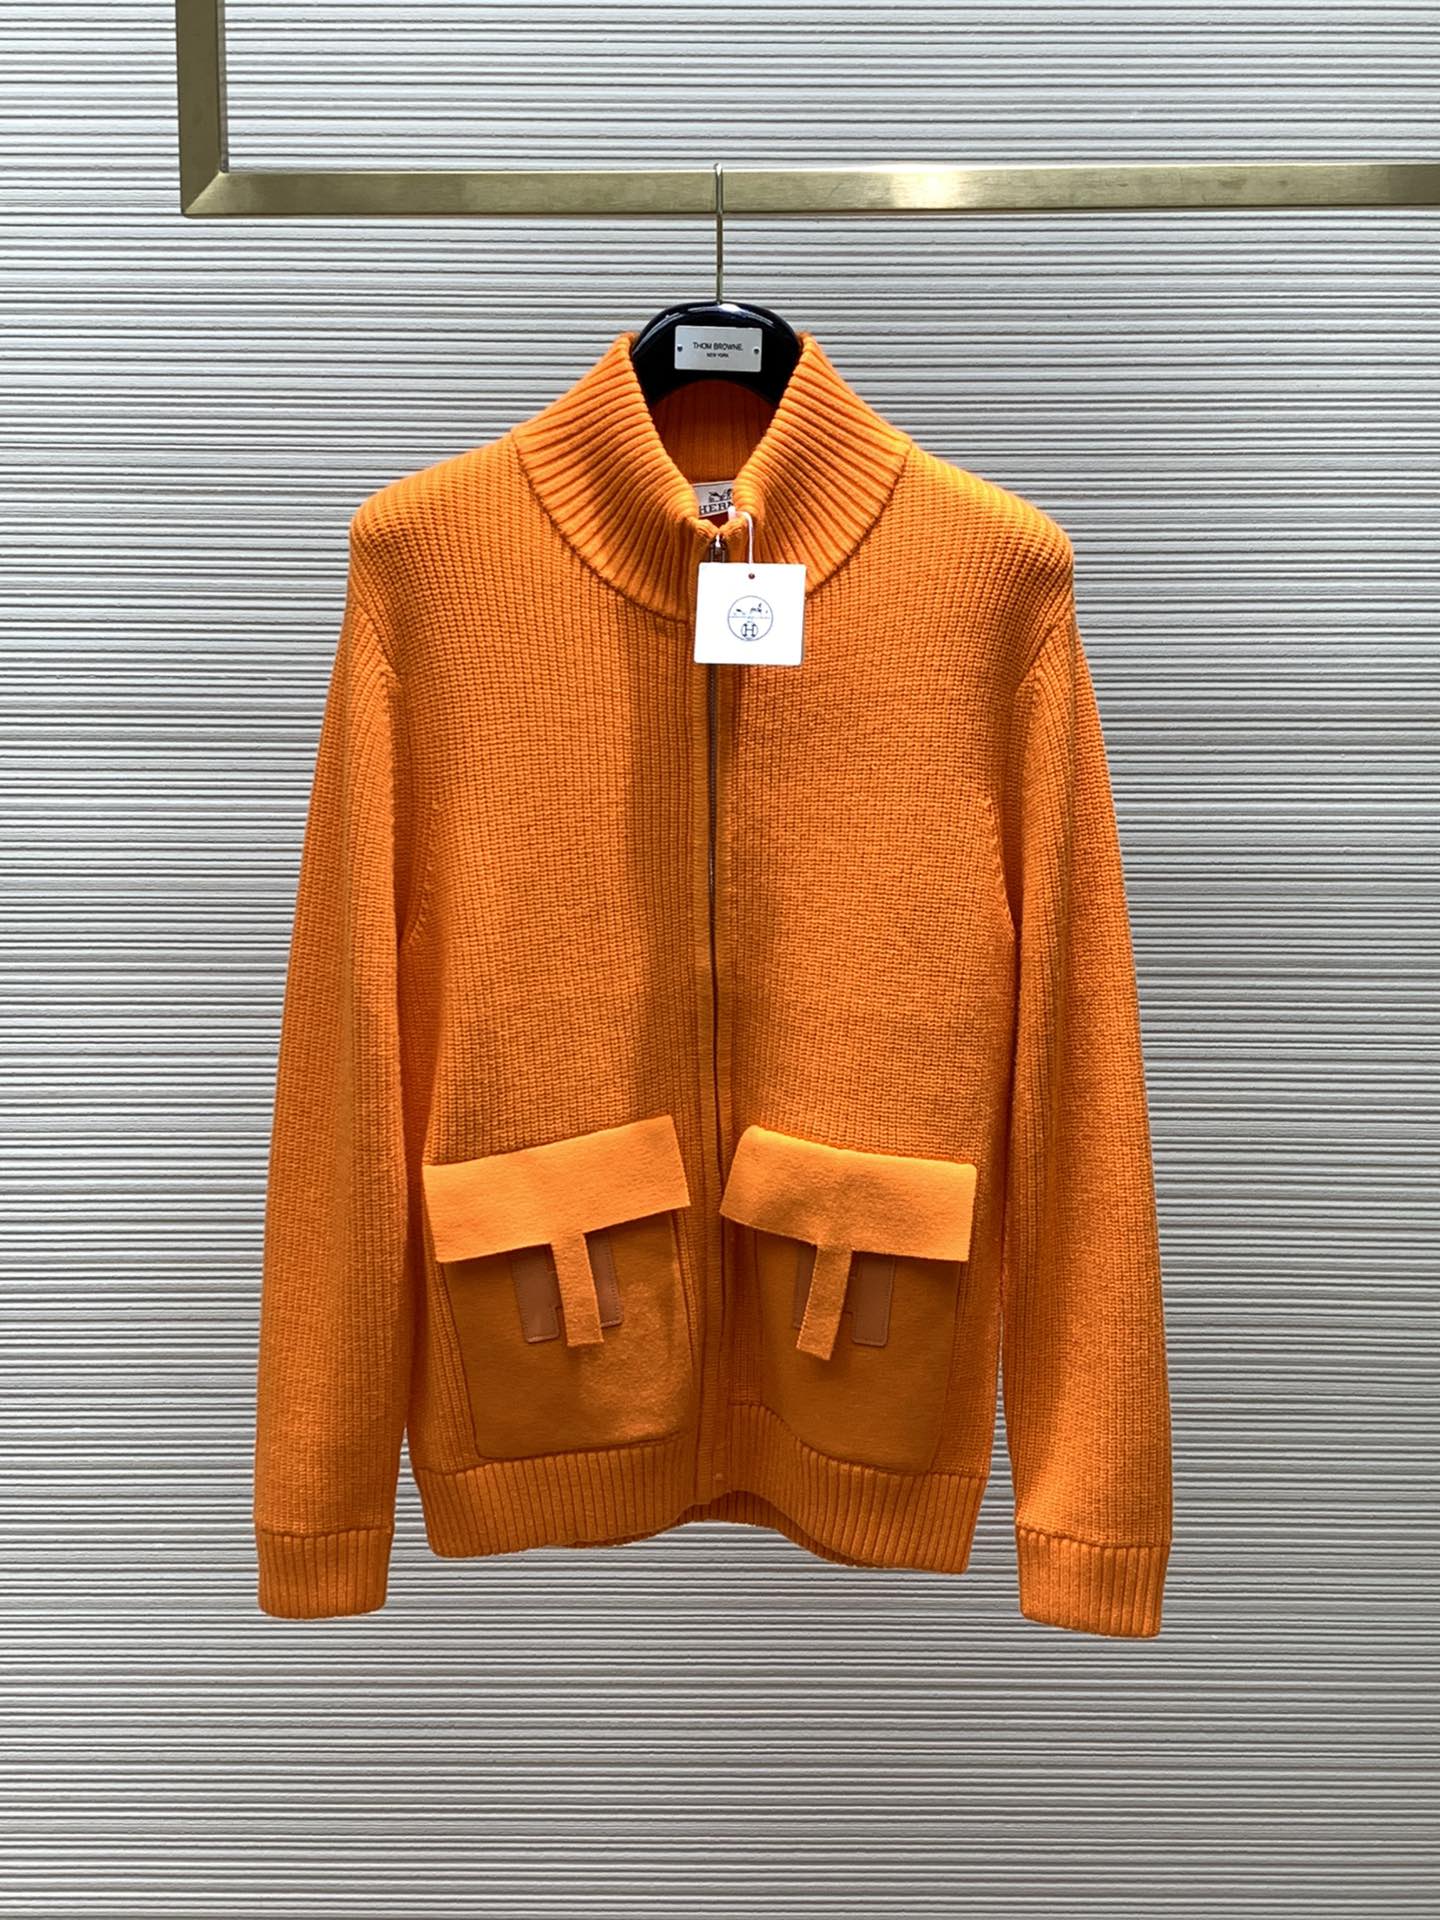 Hermes Clothing Cardigans Knit Sweater Knitting Fall/Winter Collection Fashion Casual